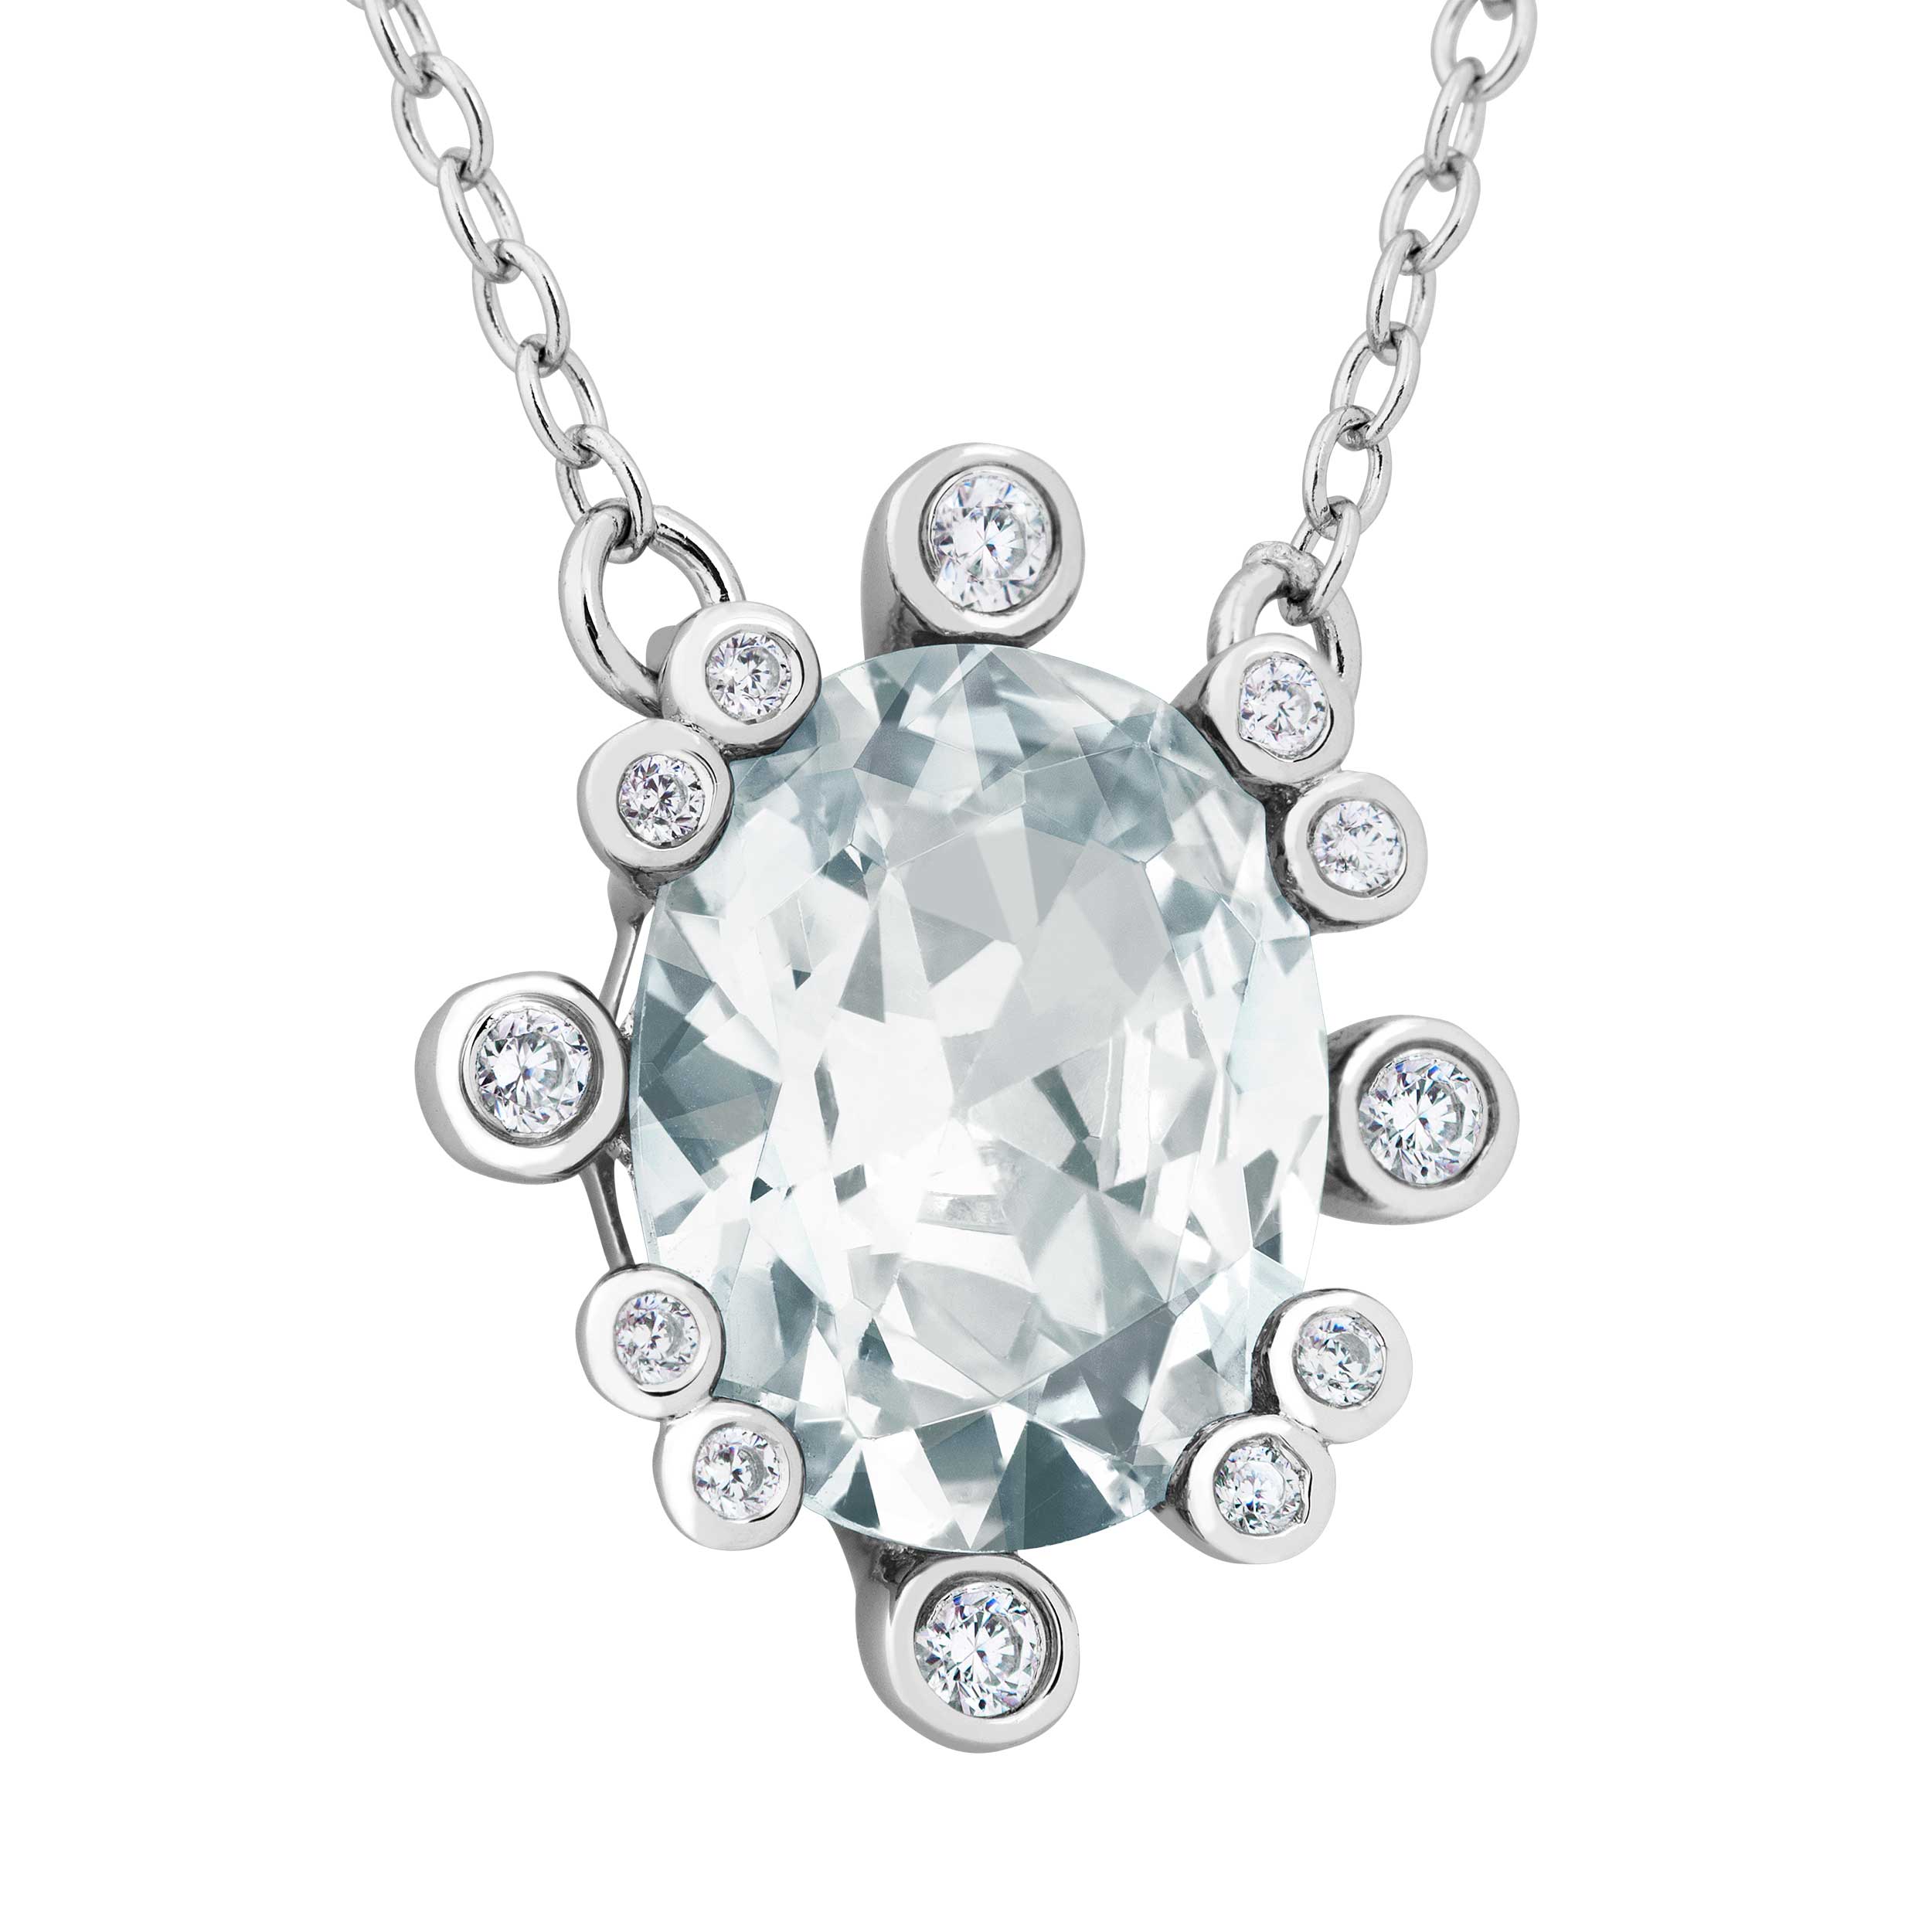 White Topaz Pendant Necklace, Rhodium Plated Sterling Silver
